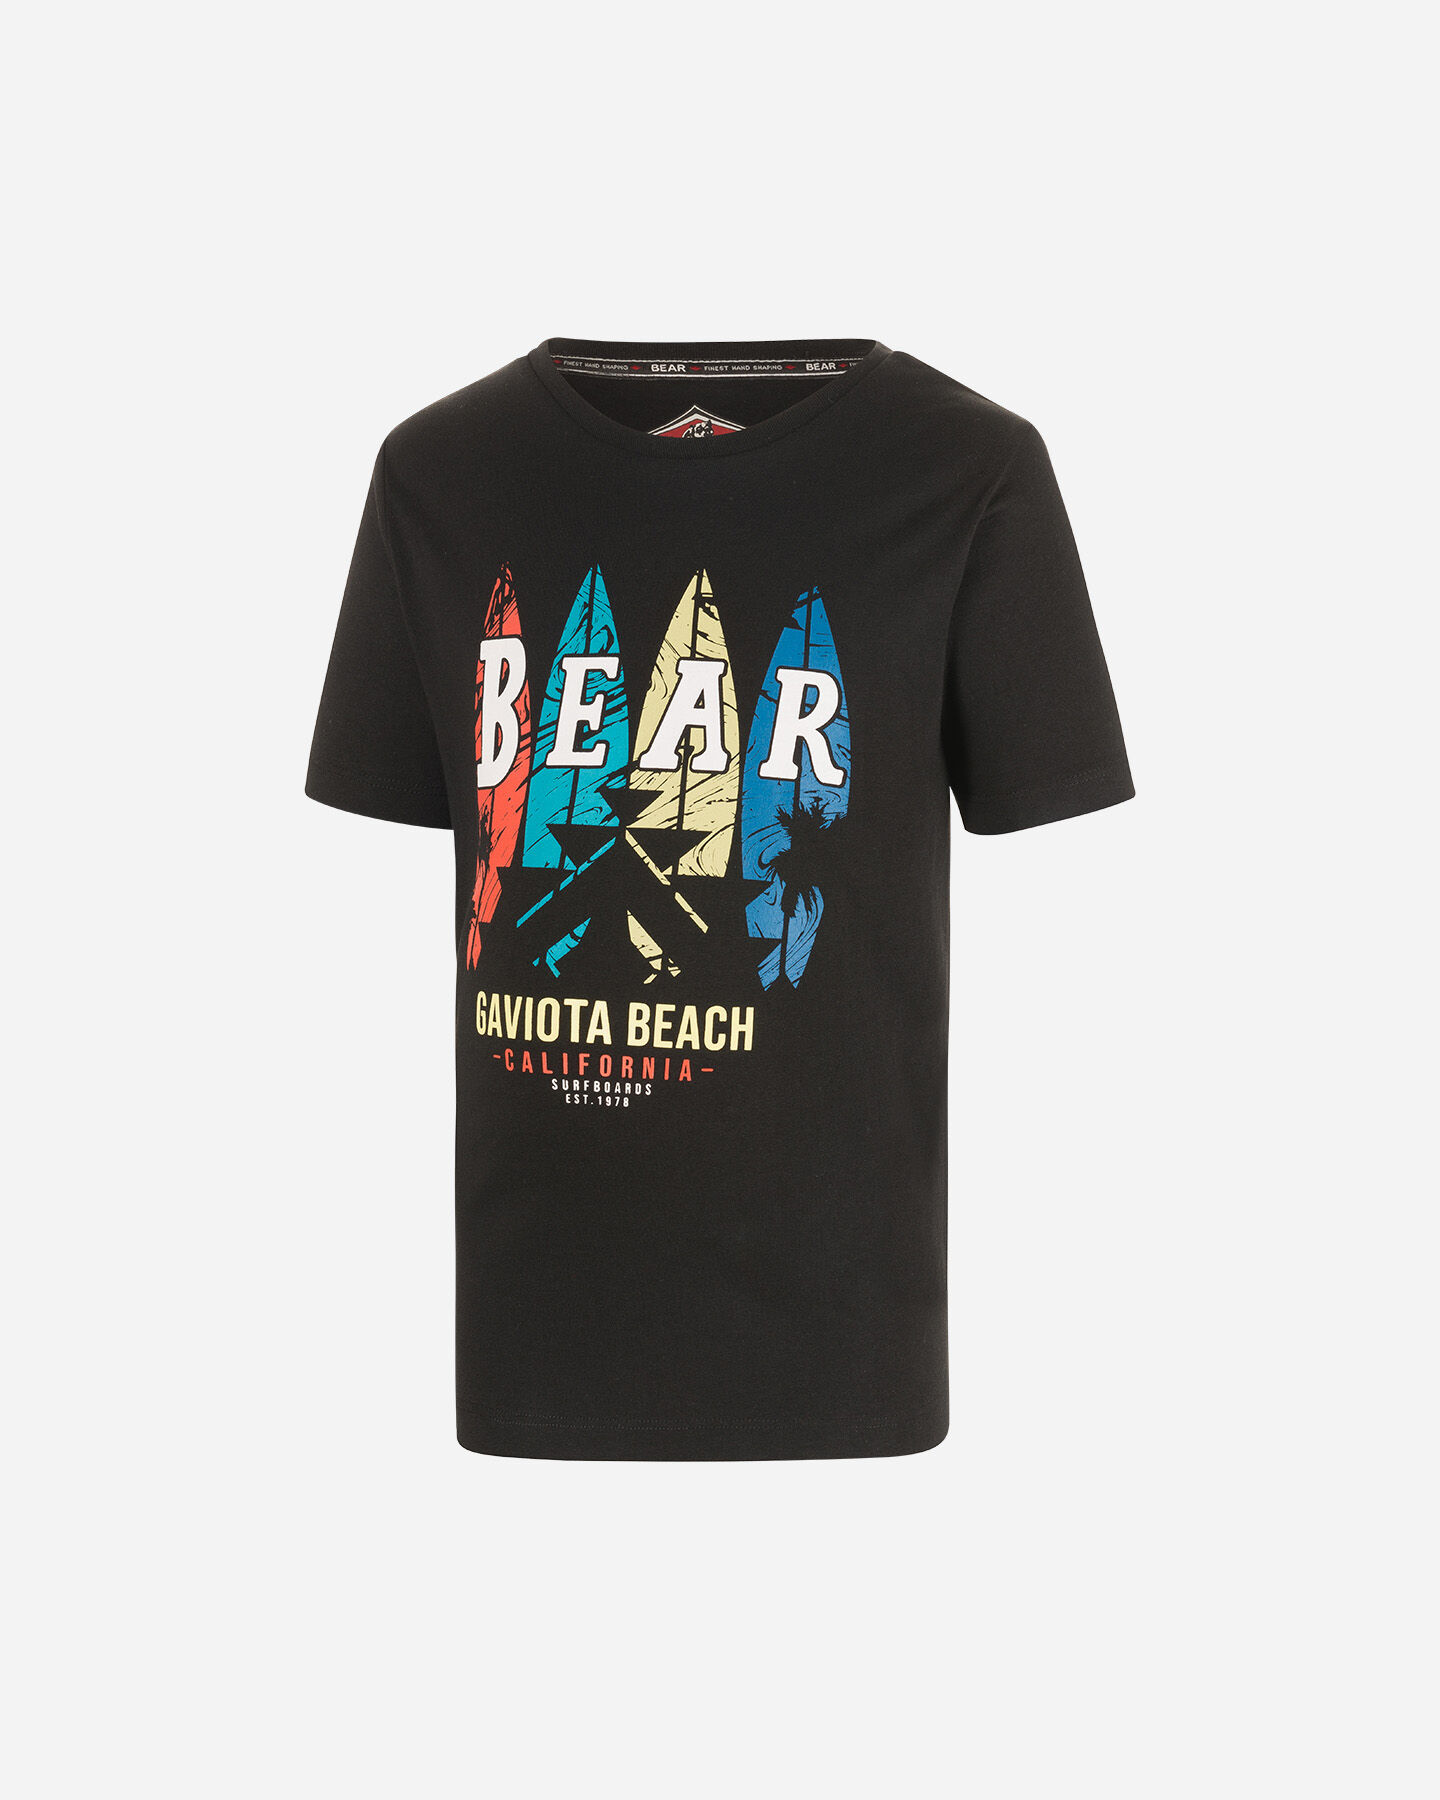  T-Shirt BEAR PRINTED SURF JR S4091326|050|6A scatto 0